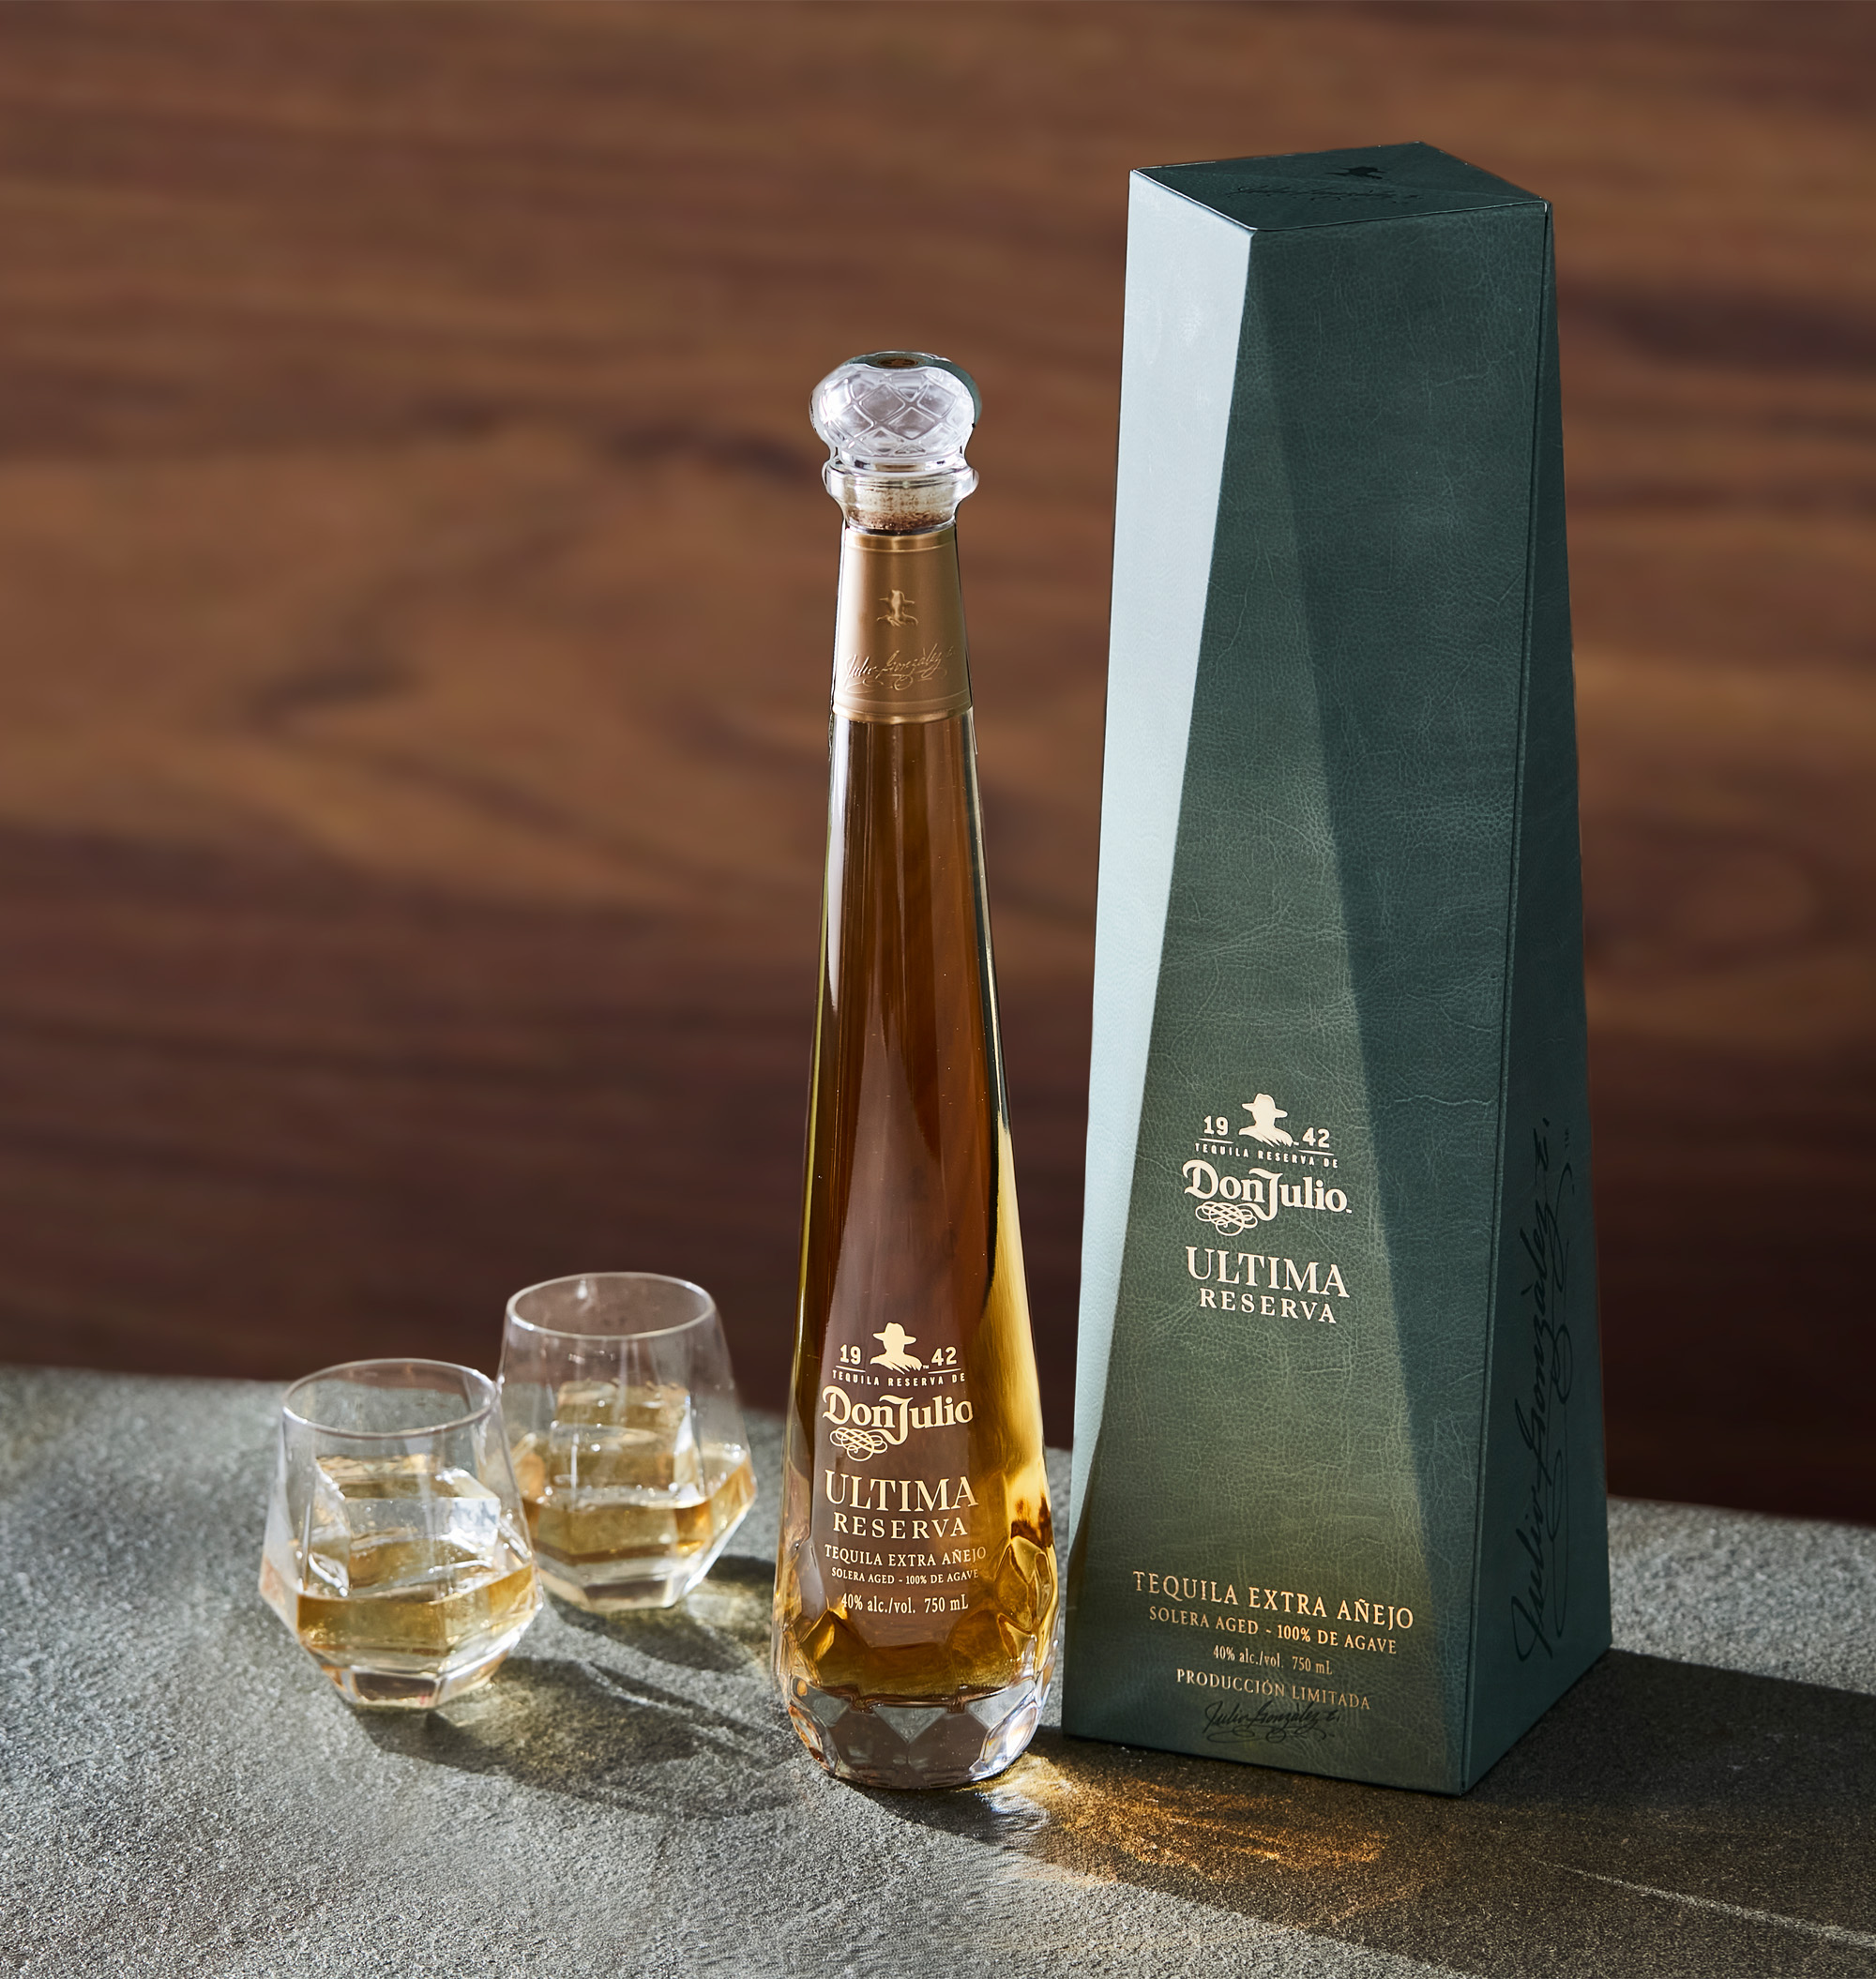 Tequila Don Julio Introduces Ultima Reserva, A Pinnacle Extra-Añejo Tequila In Celebration Of Upcoming 80th Anniversary